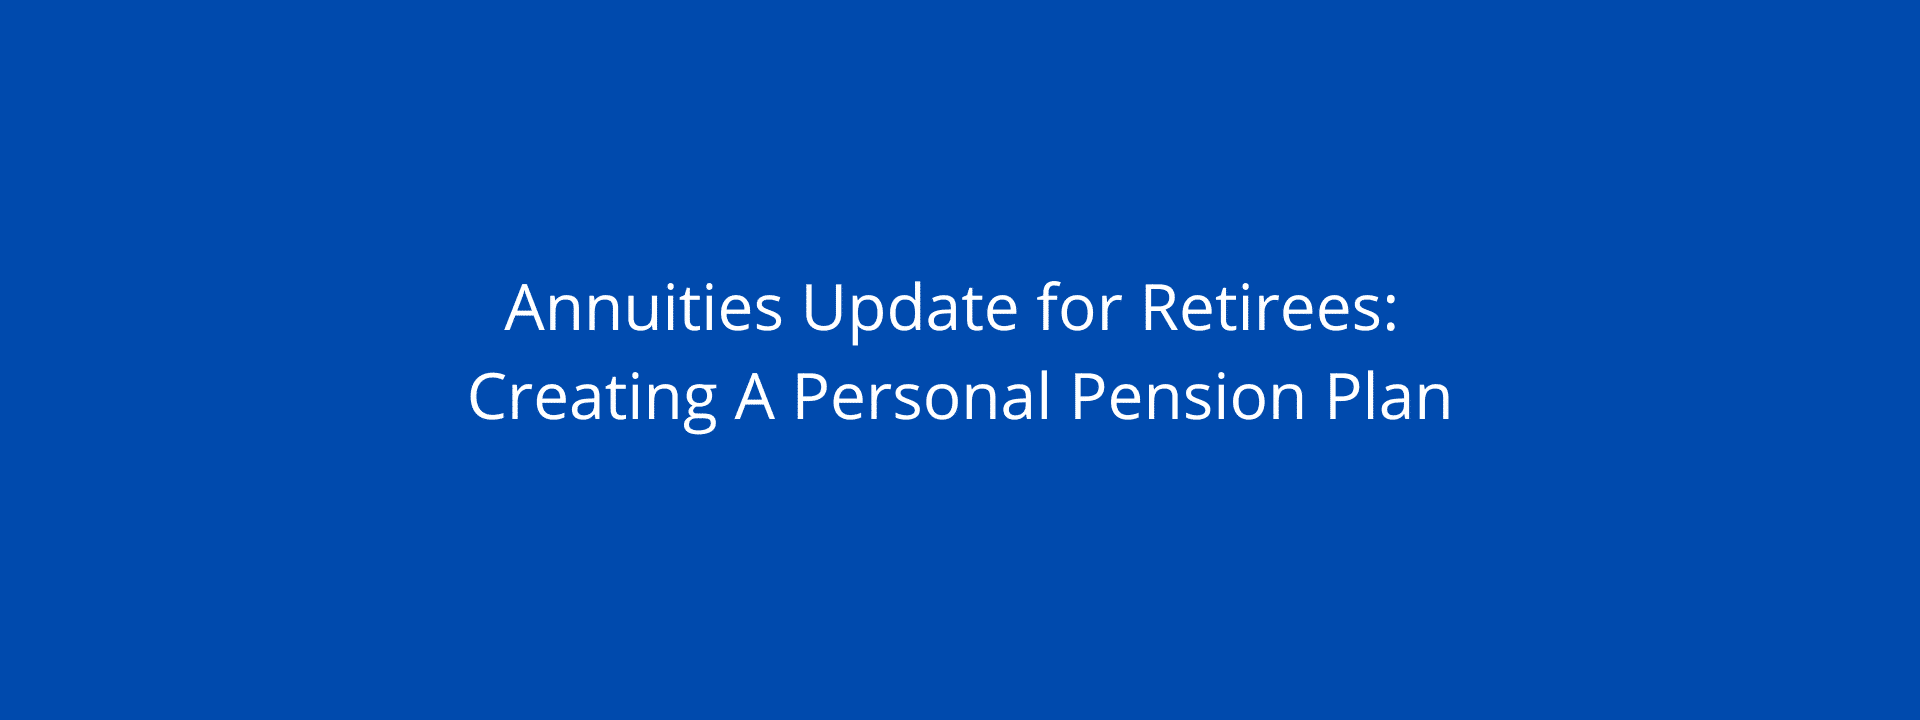 Annuities Update for Retirees